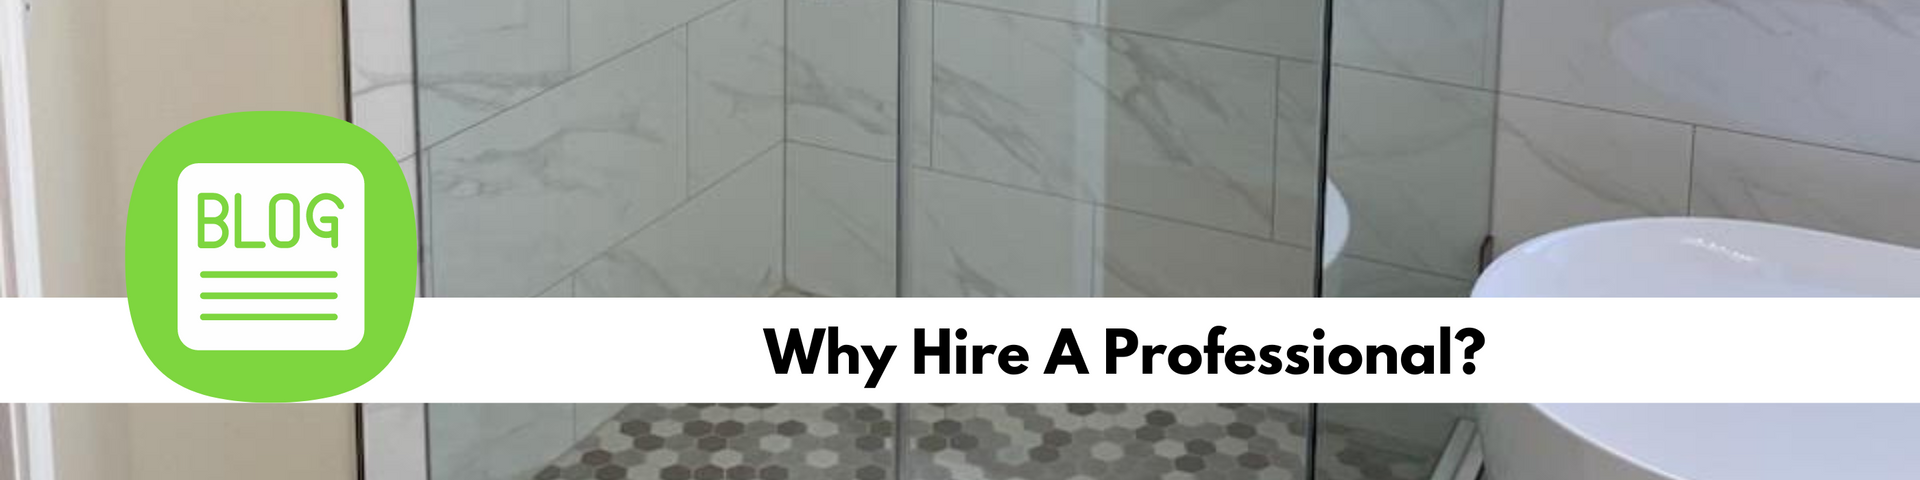 Pristine Kitchen & Bath Remodeling Blog article - Why Hire a professional bathroom contractor in Boise Idaho area